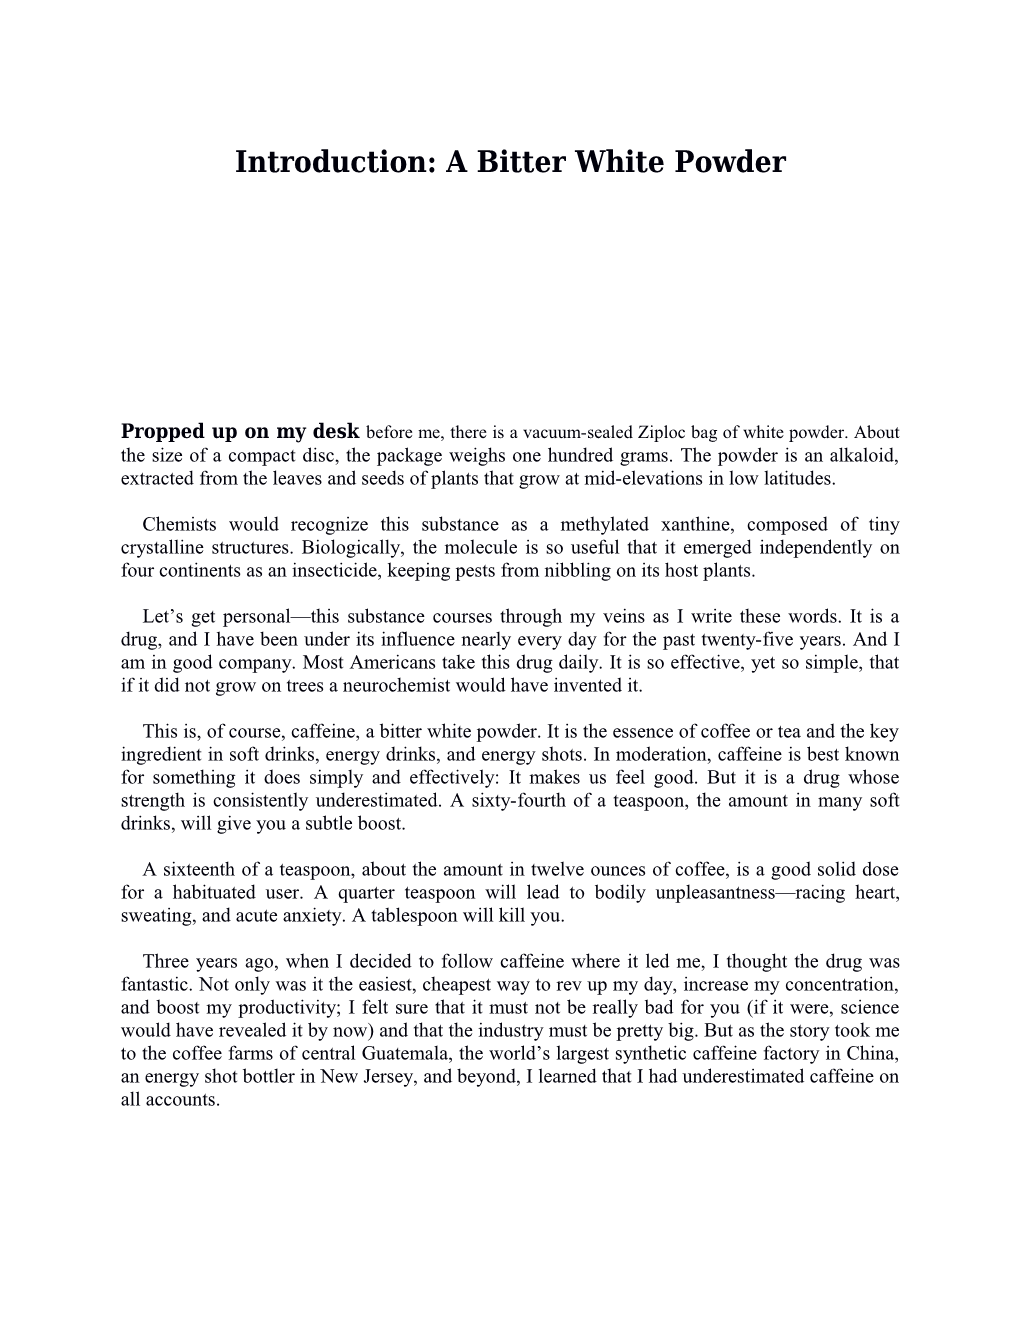 Introduction: a Bitter White Powder